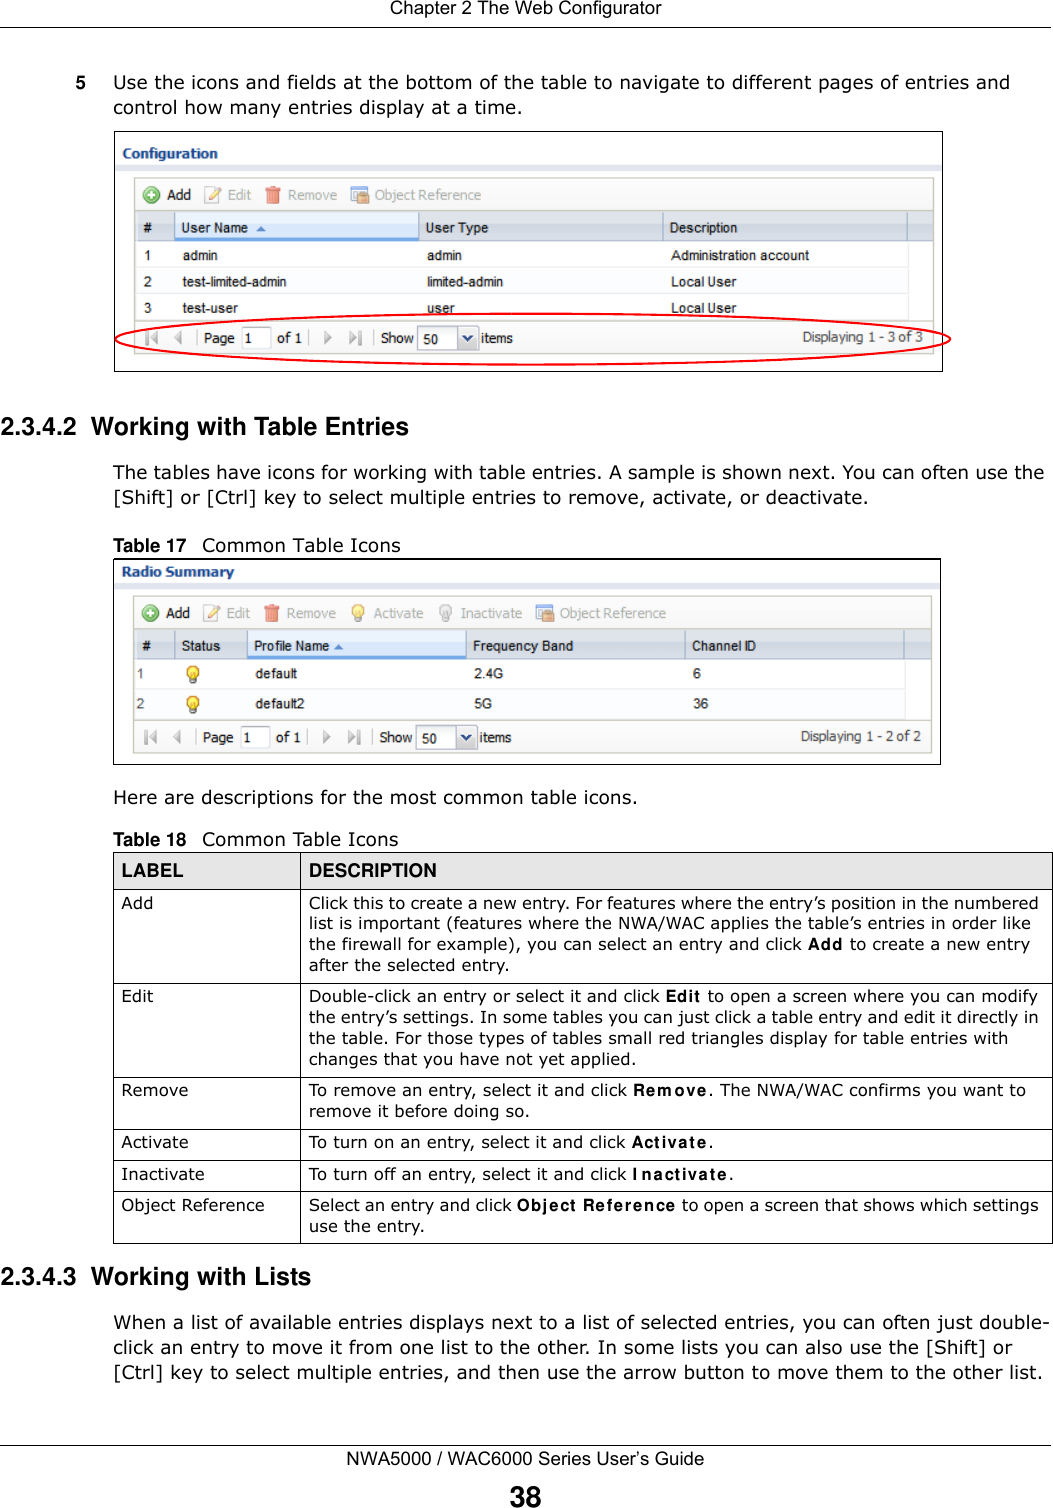 Chapter 2 The Web ConfiguratorNWA5000 / WAC6000 Series User’s Guide385Use the icons and fields at the bottom of the table to navigate to different pages of entries and control how many entries display at a time. 2.3.4.2  Working with Table EntriesThe tables have icons for working with table entries. A sample is shown next. You can often use the [Shift] or [Ctrl] key to select multiple entries to remove, activate, or deactivate. Table 17   Common Table IconsHere are descriptions for the most common table icons.2.3.4.3  Working with ListsWhen a list of available entries displays next to a list of selected entries, you can often just double-click an entry to move it from one list to the other. In some lists you can also use the [Shift] or [Ctrl] key to select multiple entries, and then use the arrow button to move them to the other list. Table 18   Common Table IconsLABEL DESCRIPTIONAdd Click this to create a new entry. For features where the entry’s position in the numbered list is important (features where the NWA/WAC applies the table’s entries in order like the firewall for example), you can select an entry and click Add to create a new entry after the selected entry.Edit Double-click an entry or select it and click Edit to open a screen where you can modify the entry’s settings. In some tables you can just click a table entry and edit it directly in the table. For those types of tables small red triangles display for table entries with changes that you have not yet applied.Remove To remove an entry, select it and click Remove. The NWA/WAC confirms you want to remove it before doing so.Activate To turn on an entry, select it and click Activate.Inactivate To turn off an entry, select it and click Inactivate.Object Reference Select an entry and click Object Reference to open a screen that shows which settings use the entry.